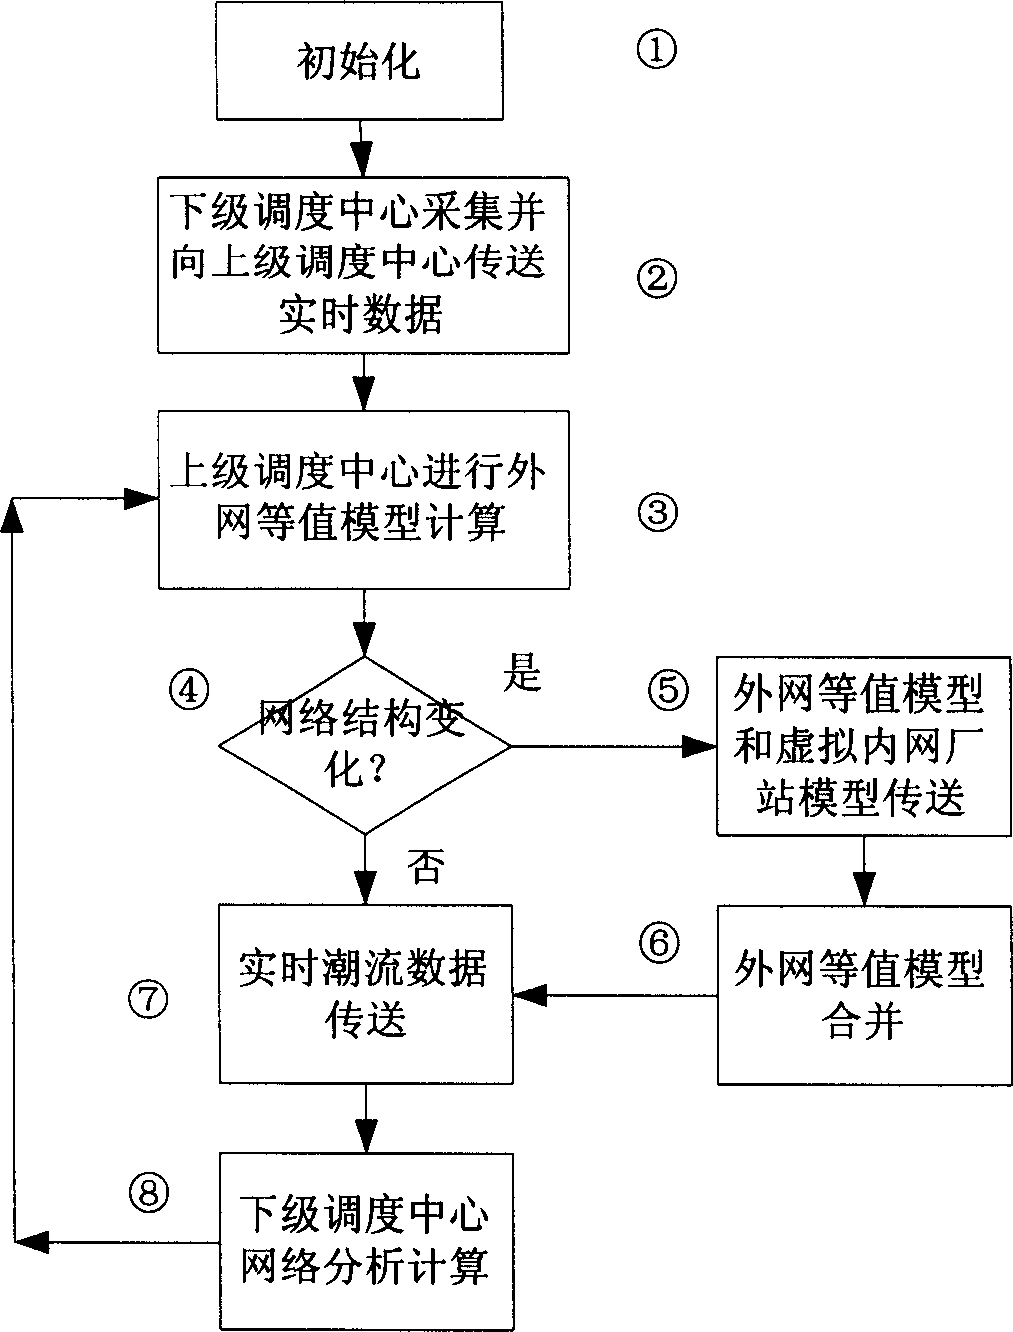 Power system external network equivalent model automatic forming method